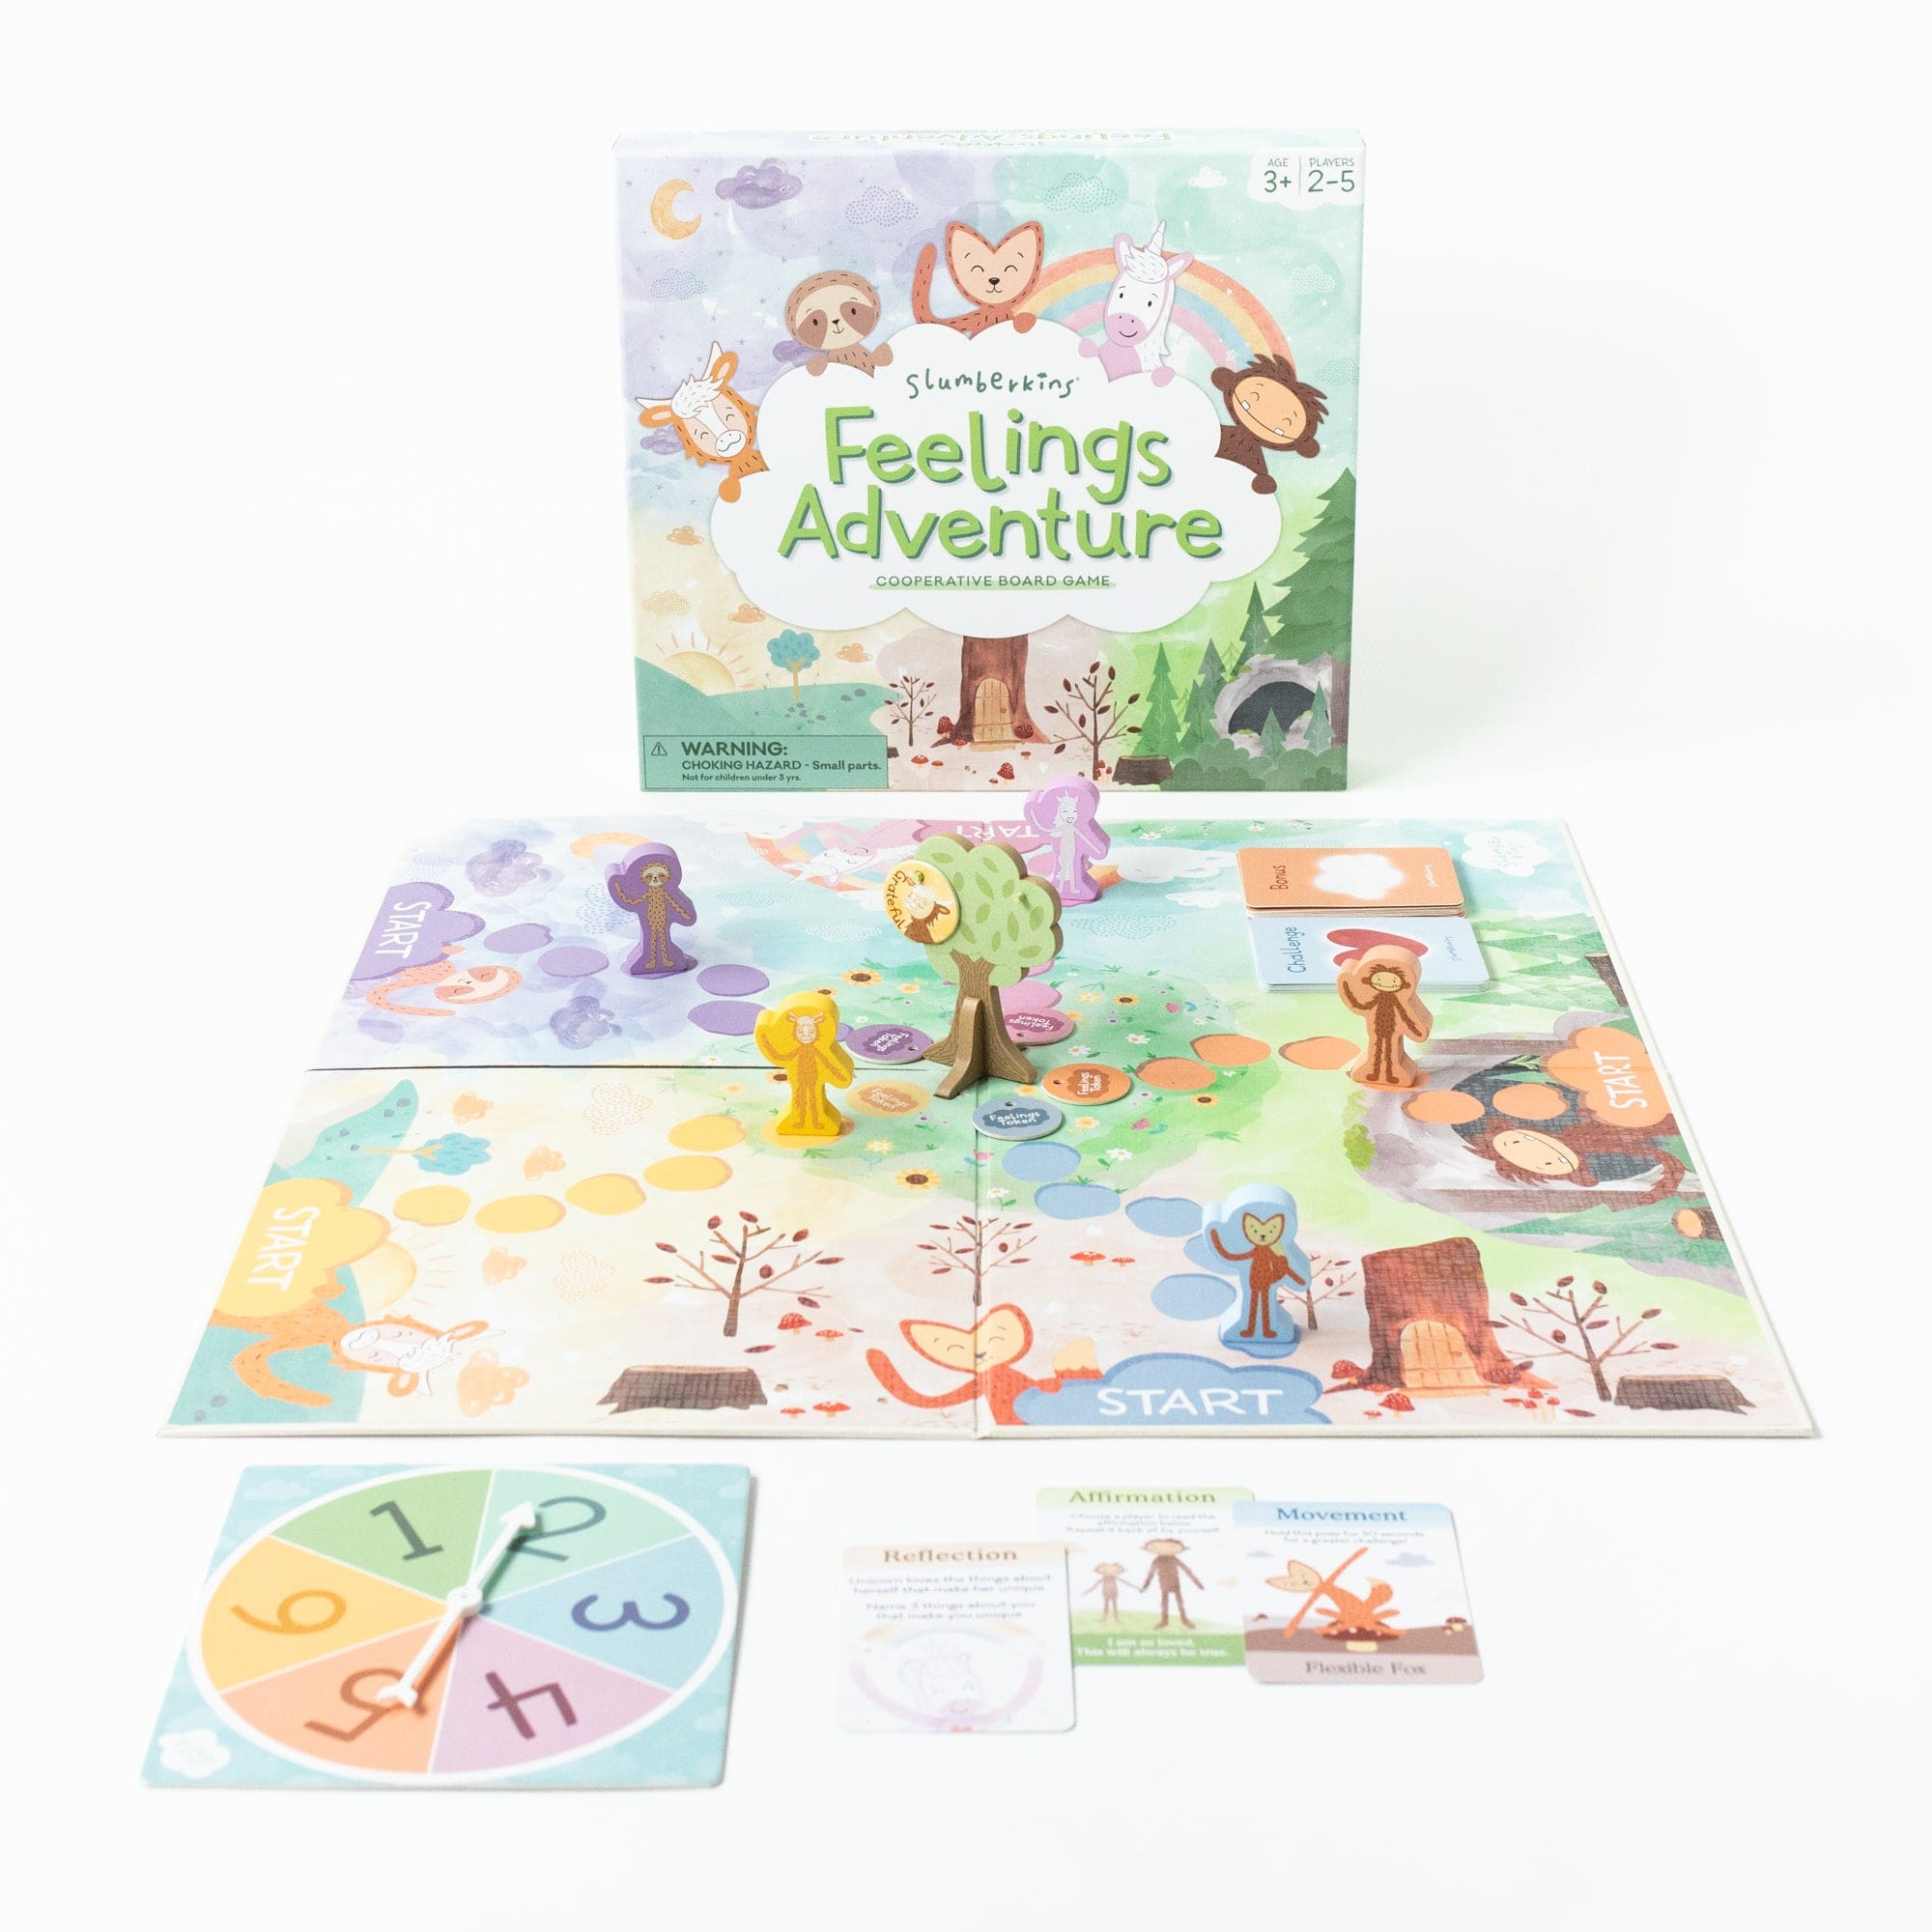 Feelings Adventure Board Game - View Product